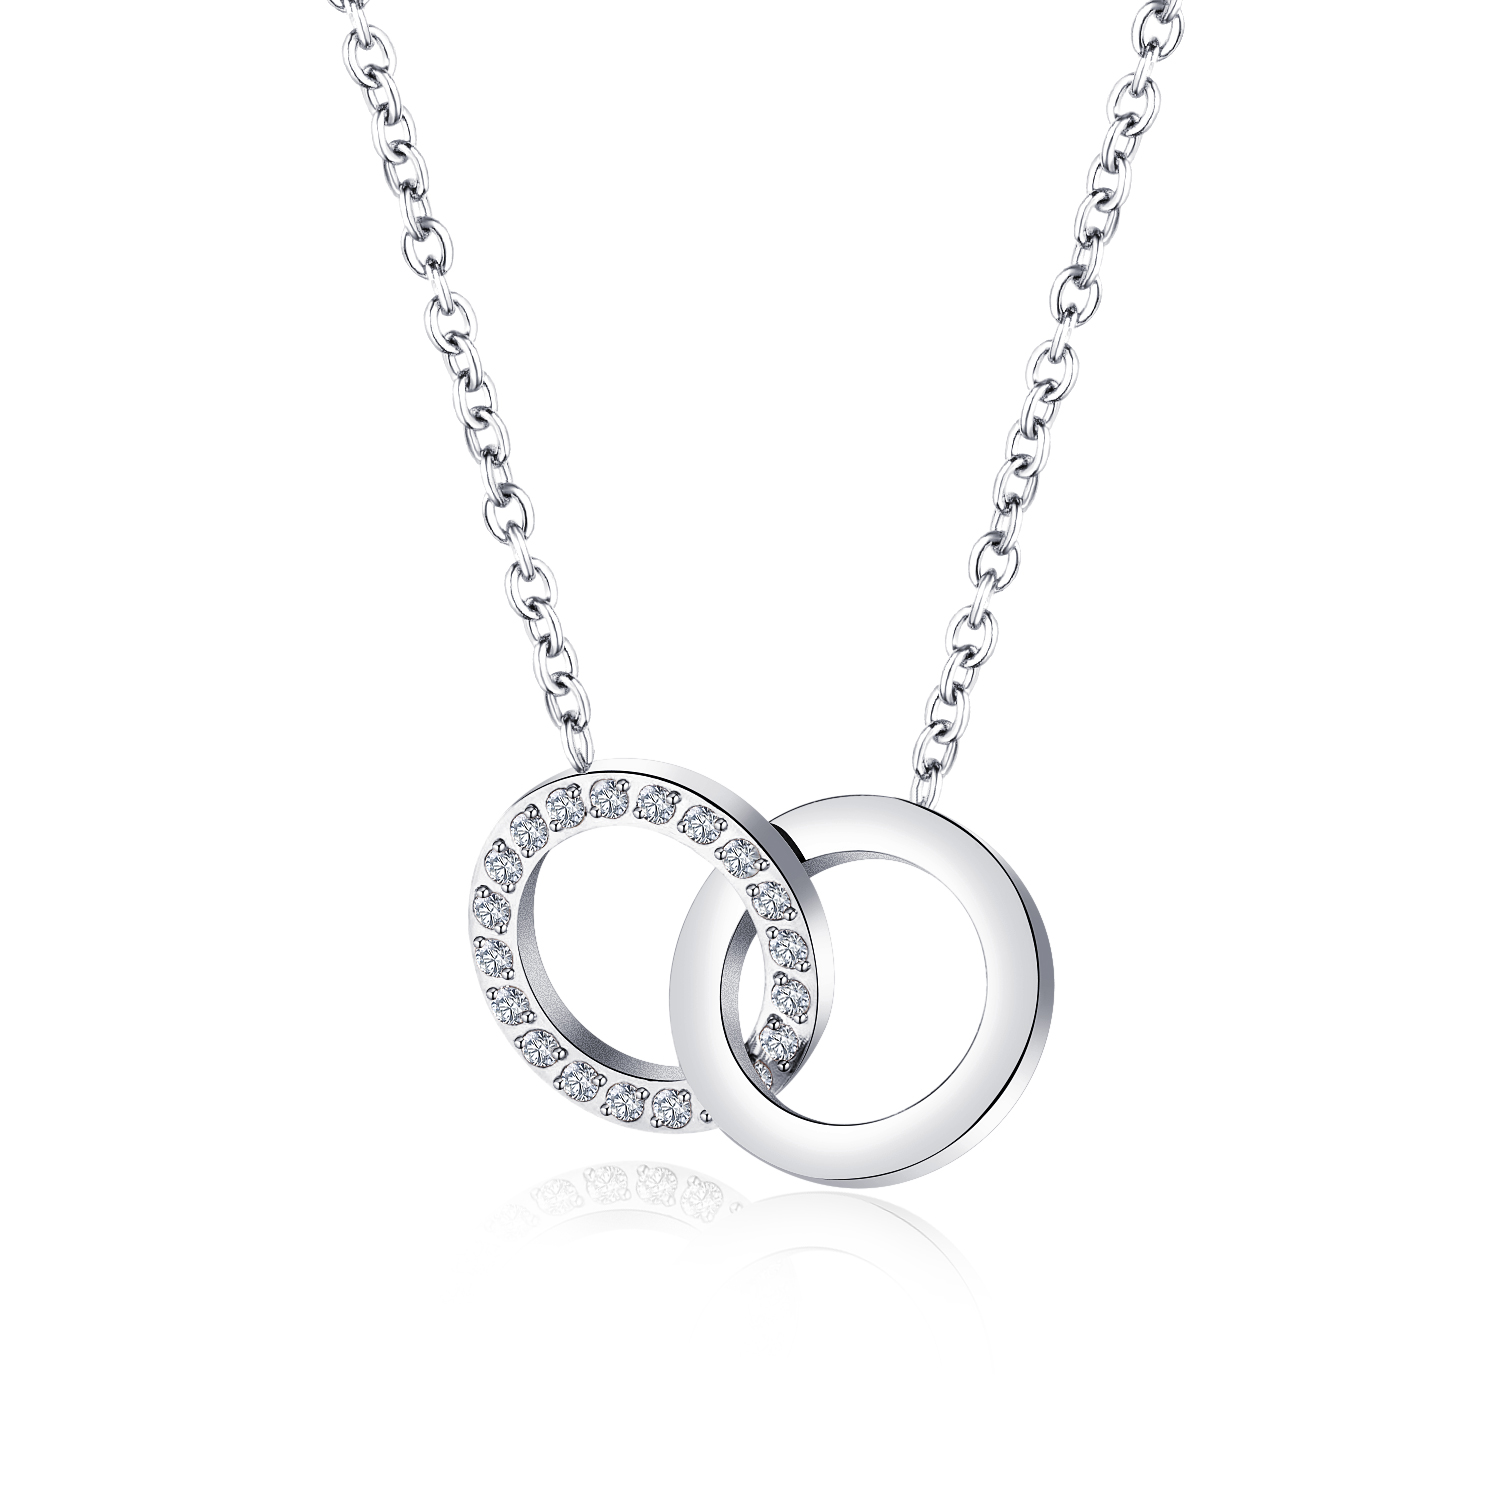 Duble Rings necklace